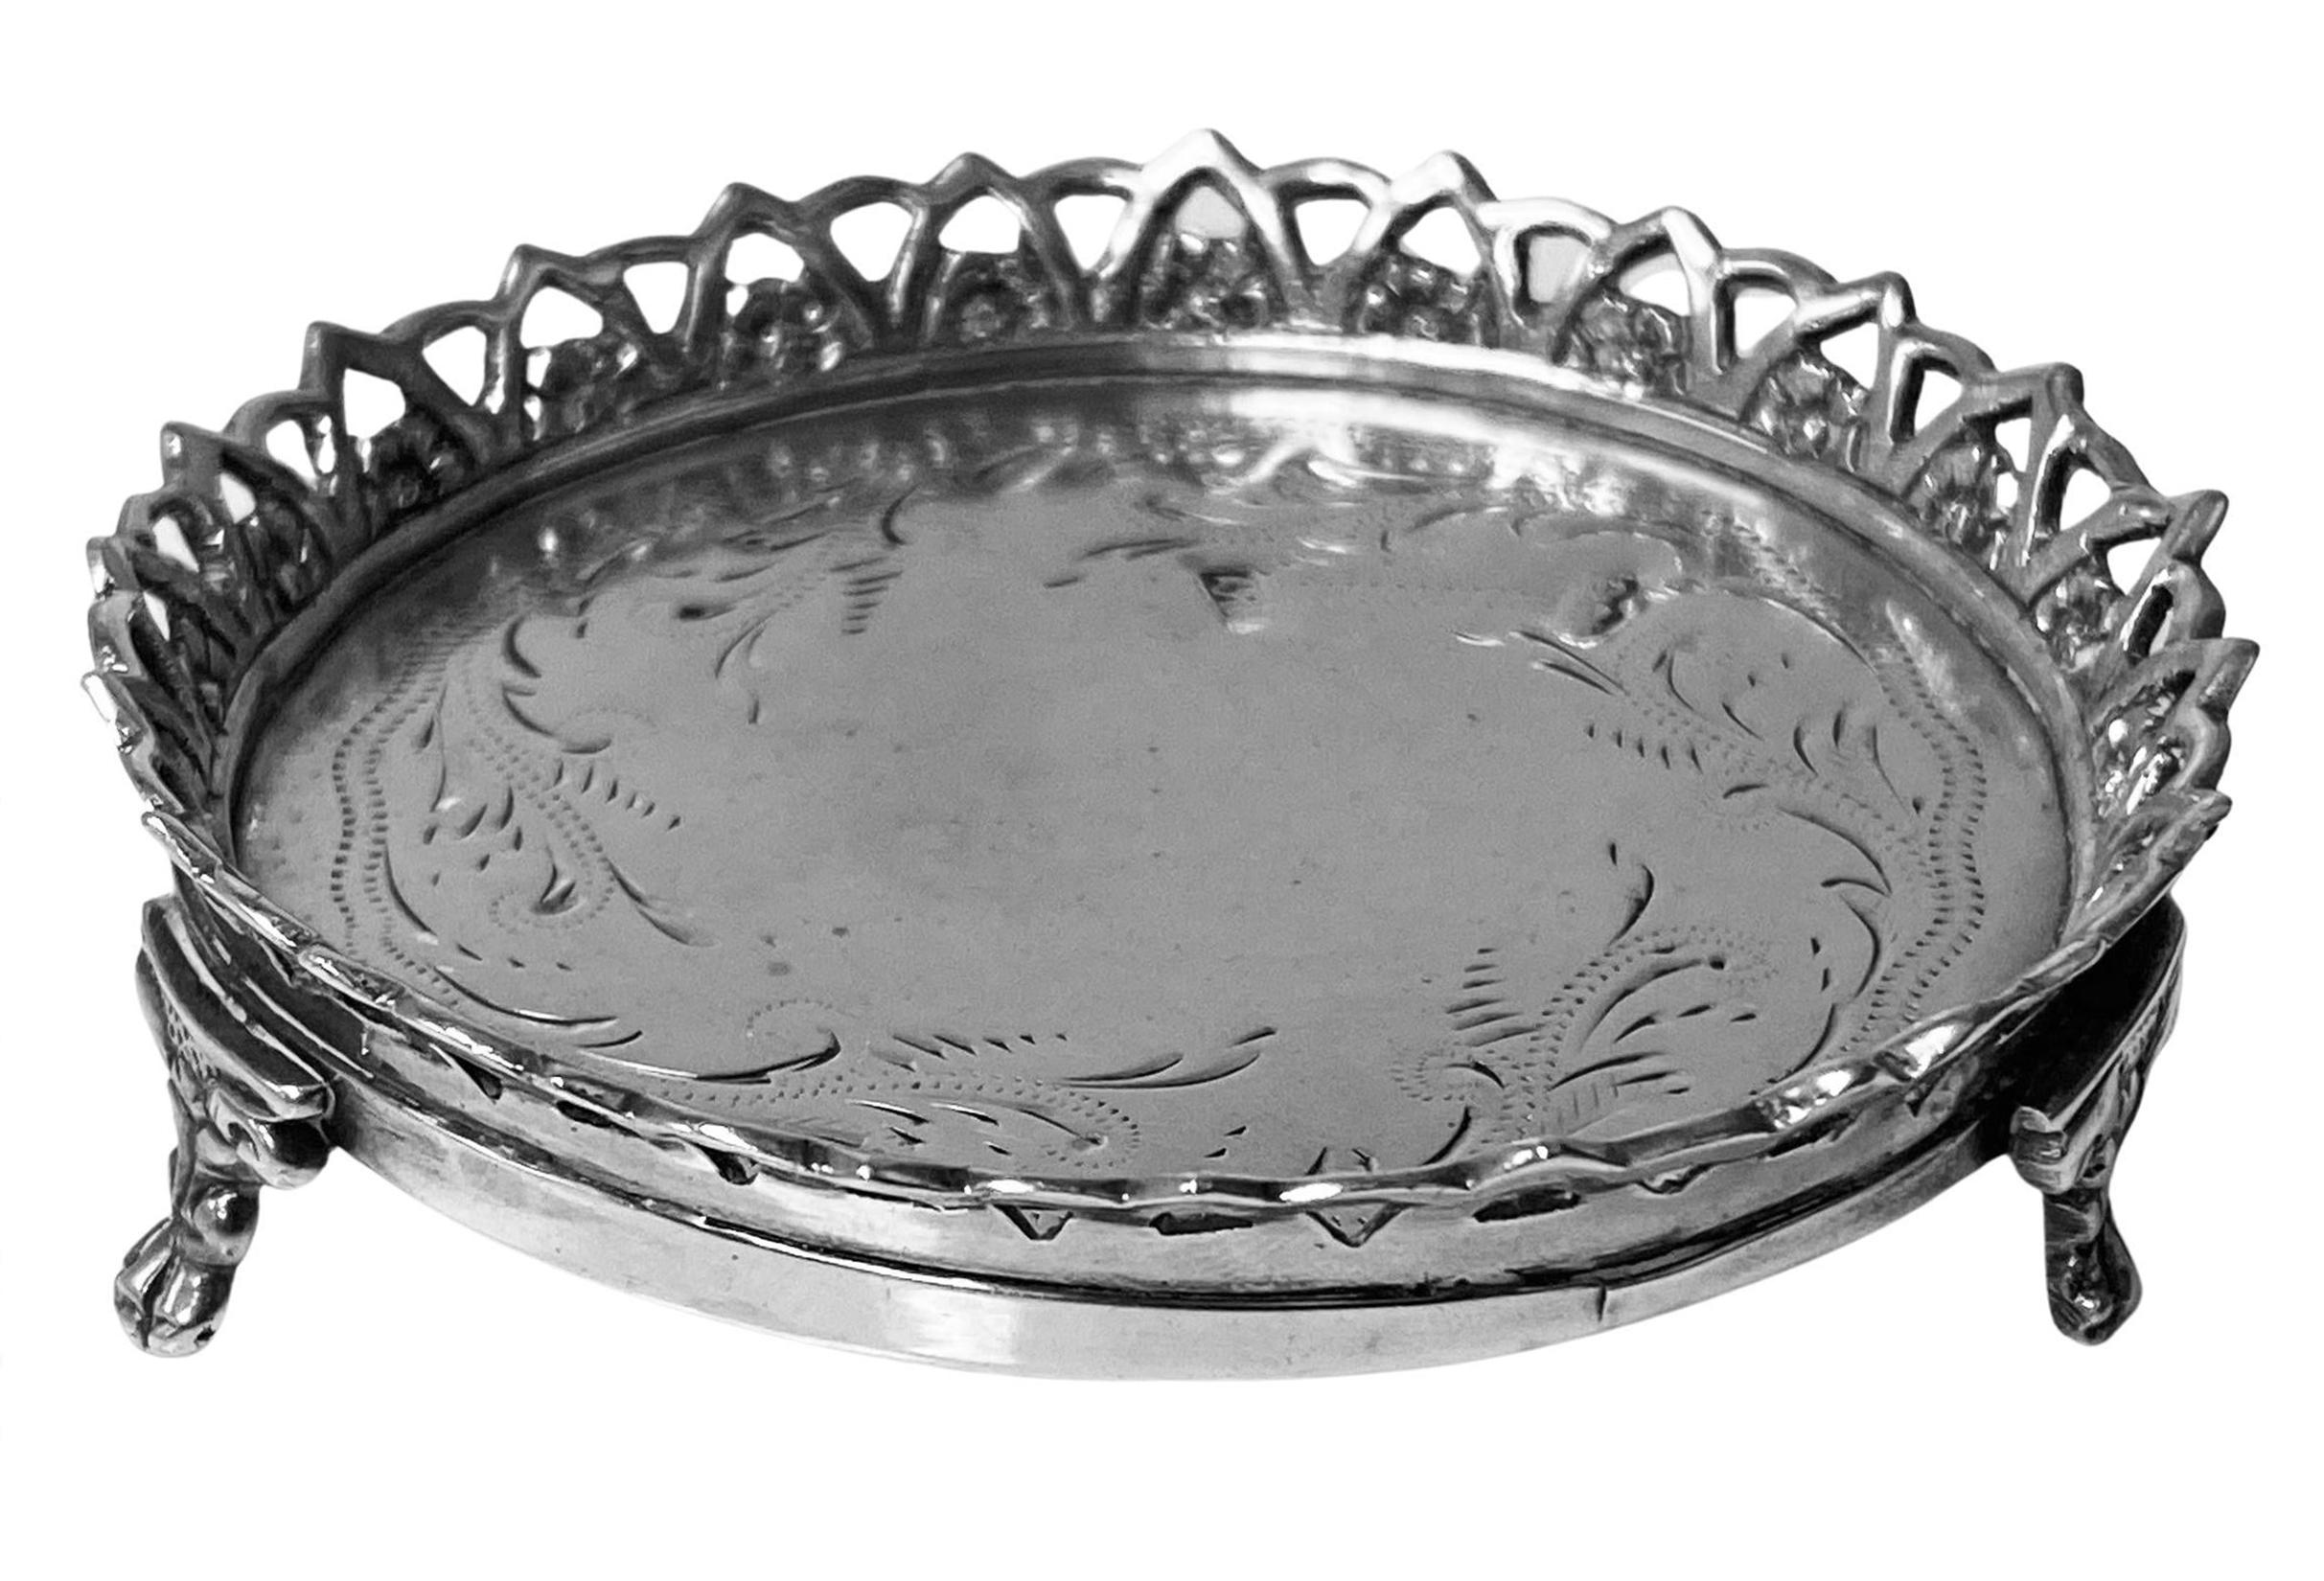 18th century Continental Silver Coaster Évora Portugal  C.1780. The round coaster on three foliate paw supports, the centre with engraved pin pricked and foliate decoration upper applied pierced and foliate border. Continental marks to coaster.